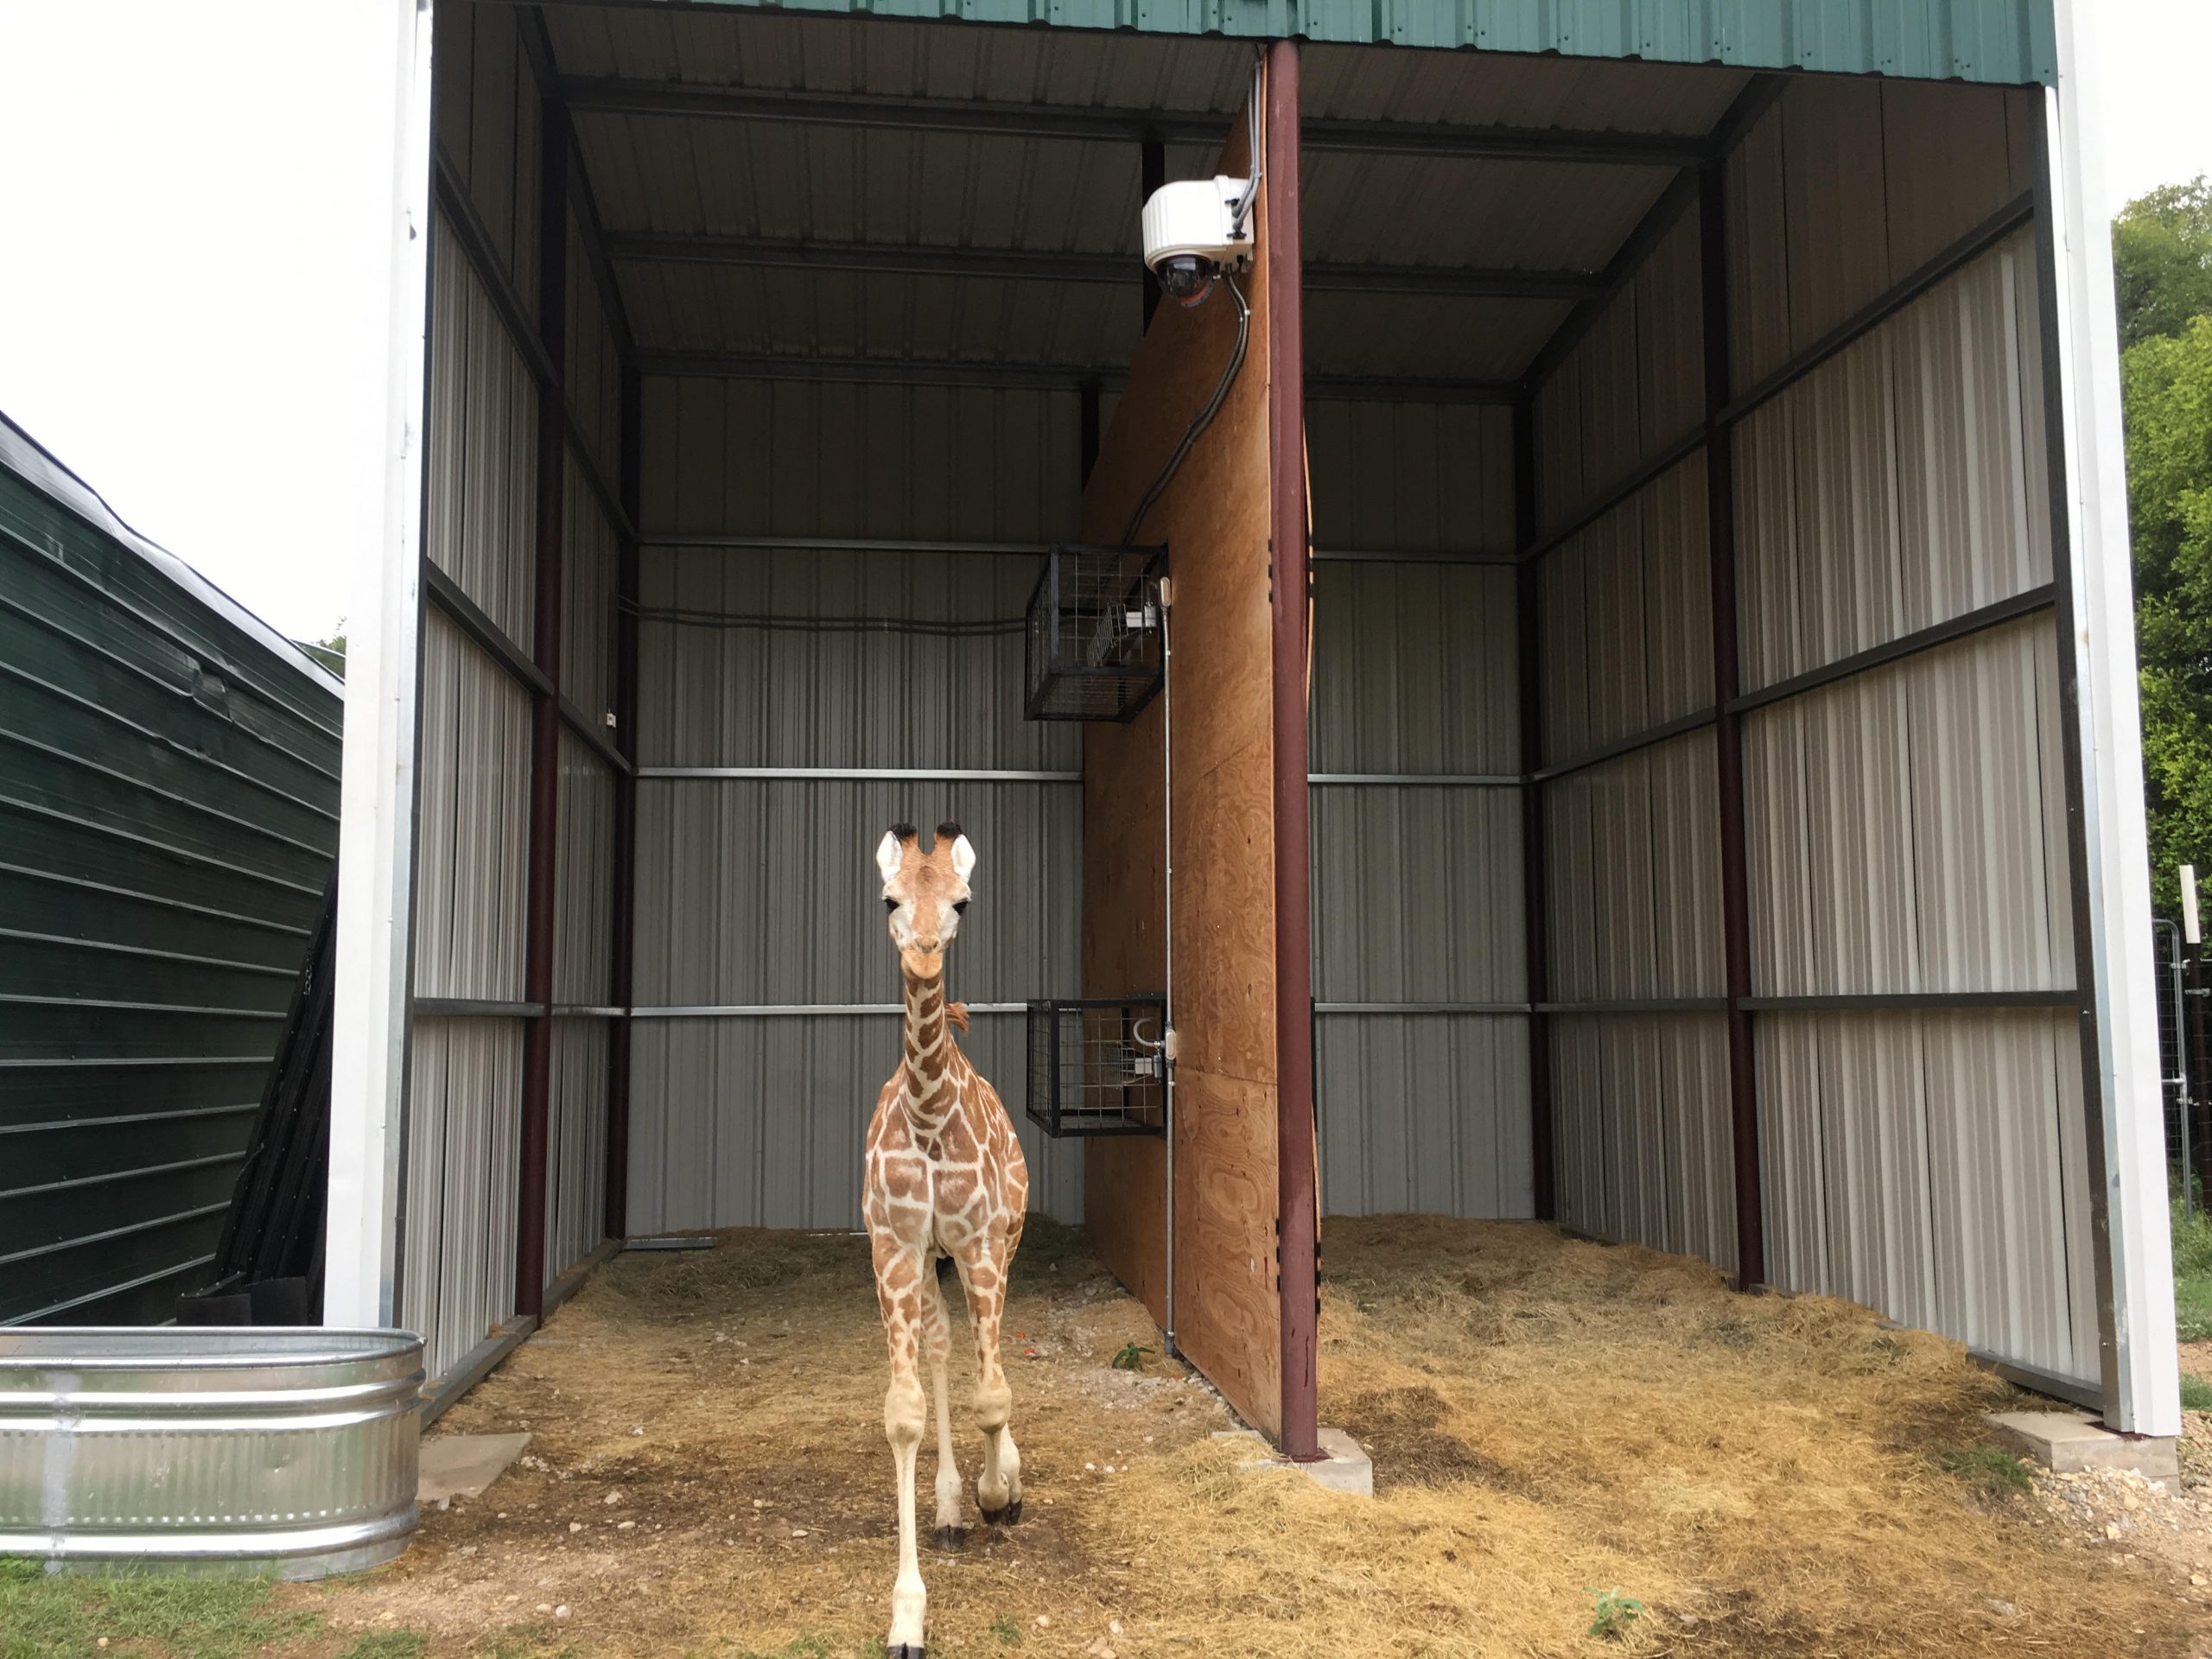 XClear Self Cleaning Camera Enclosure System Installed in a Giraffe Exhibit 